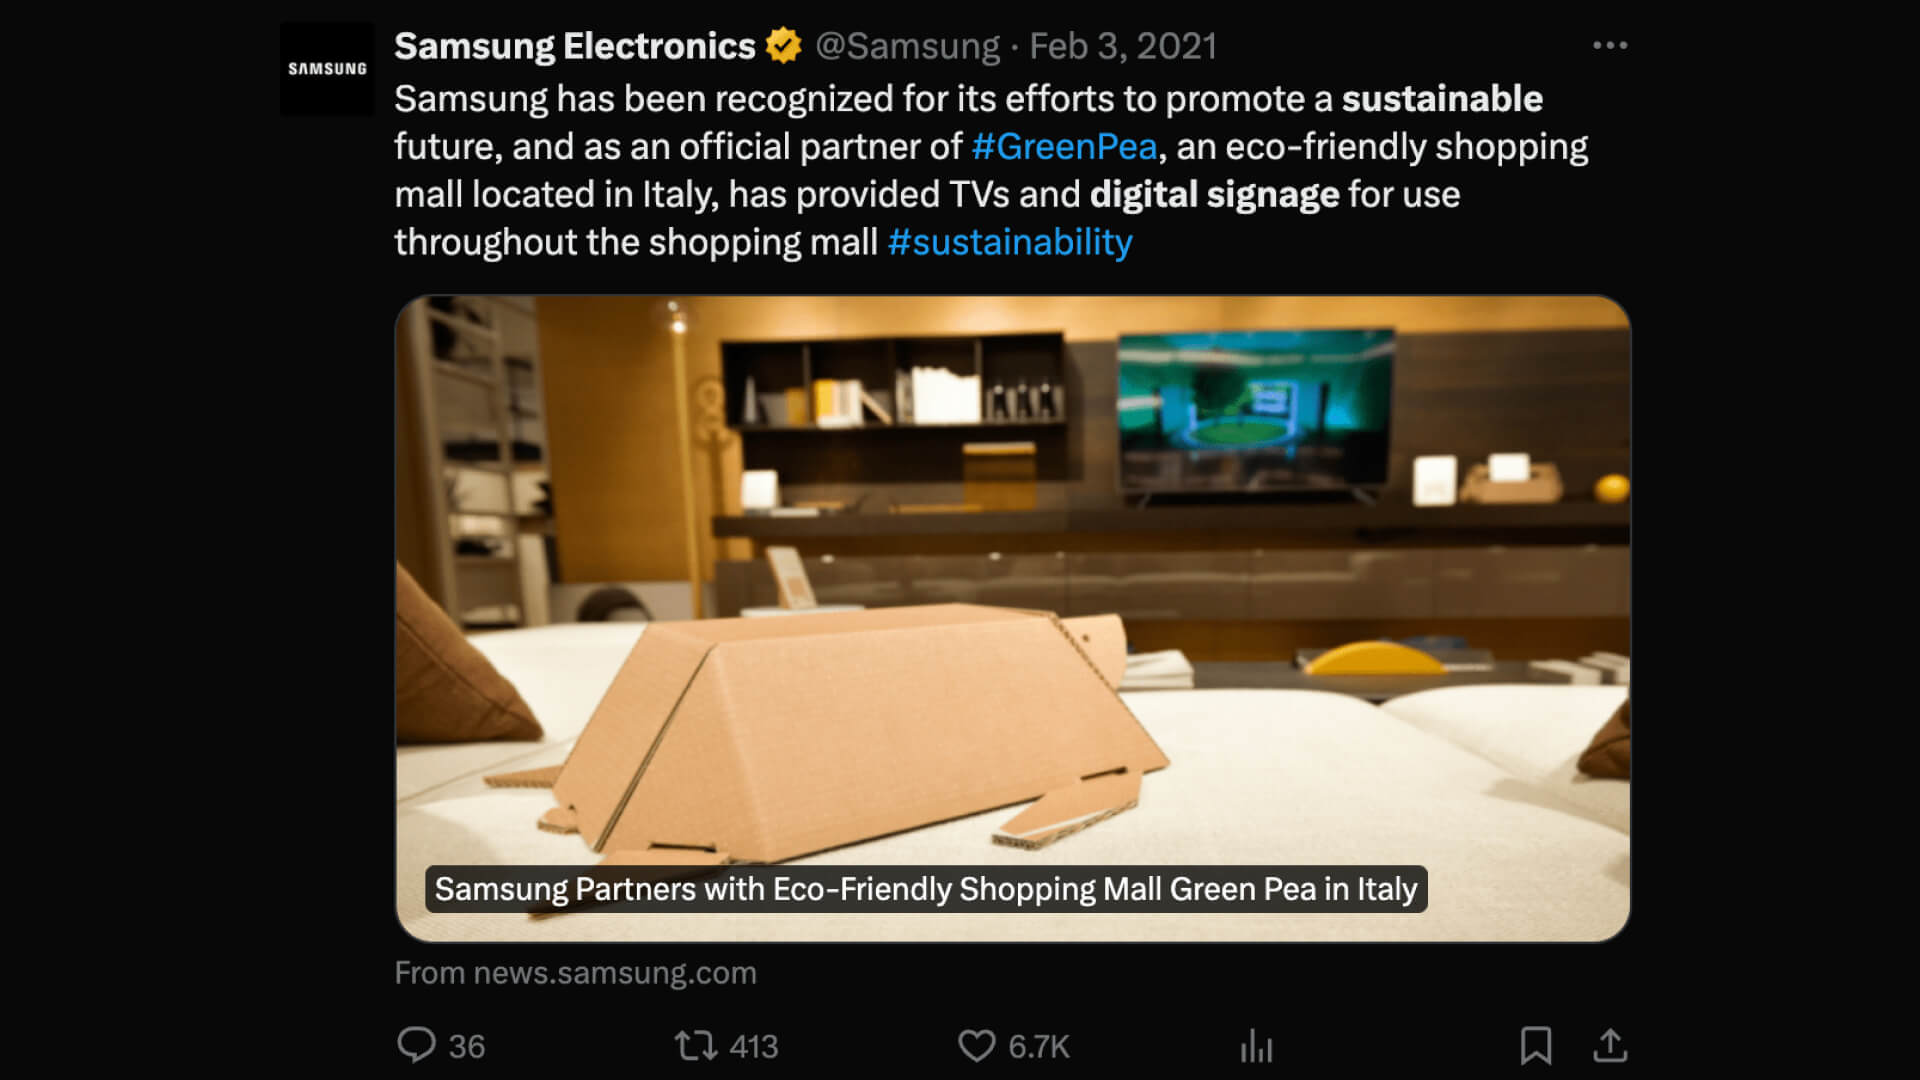 Samsung's tweet showing donation of TVs and digital signage to Green Pea